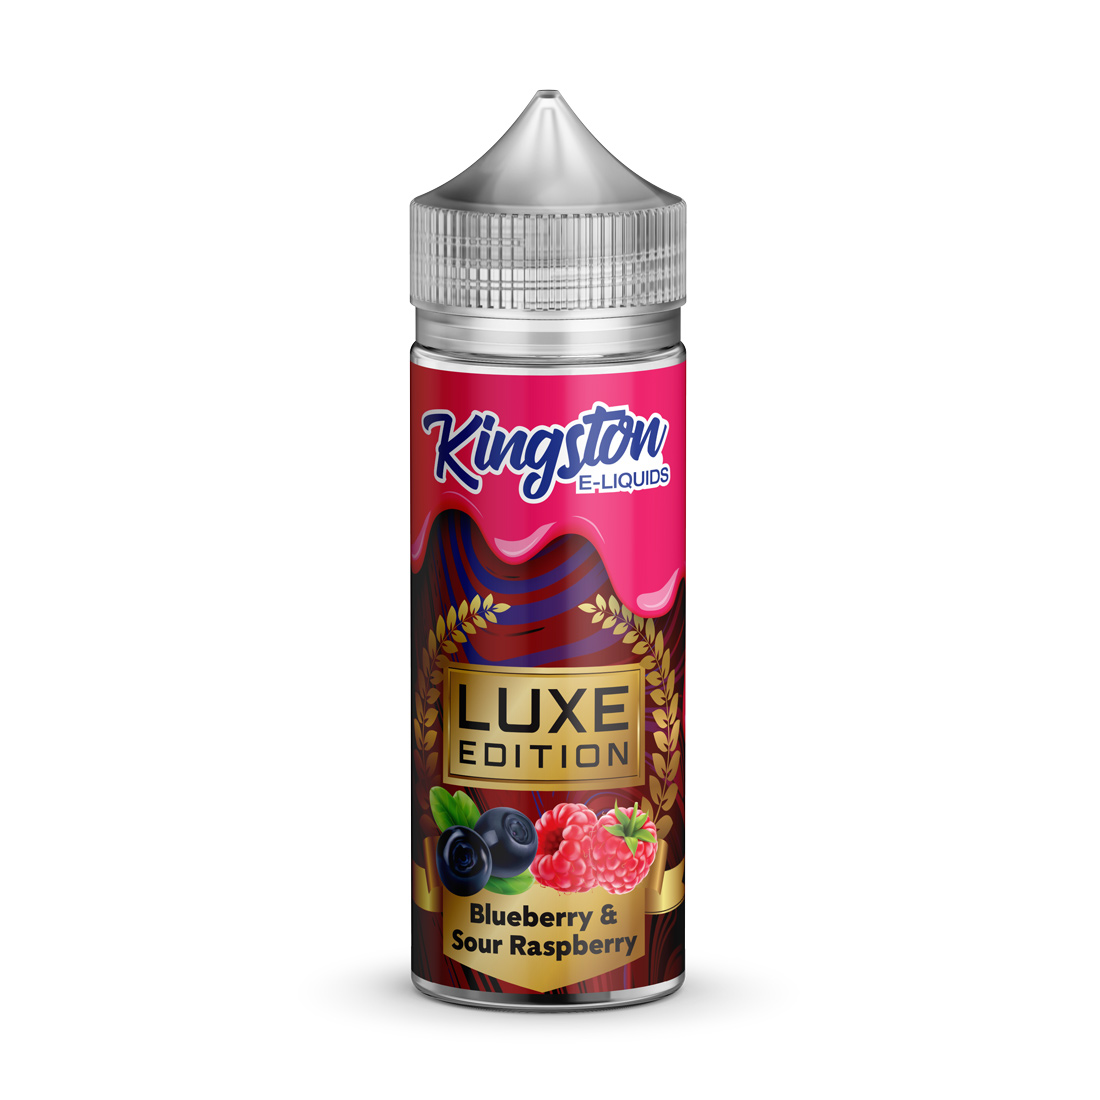 Blueberry Sour Raspberry by Kingston Luxe Edition 100ml